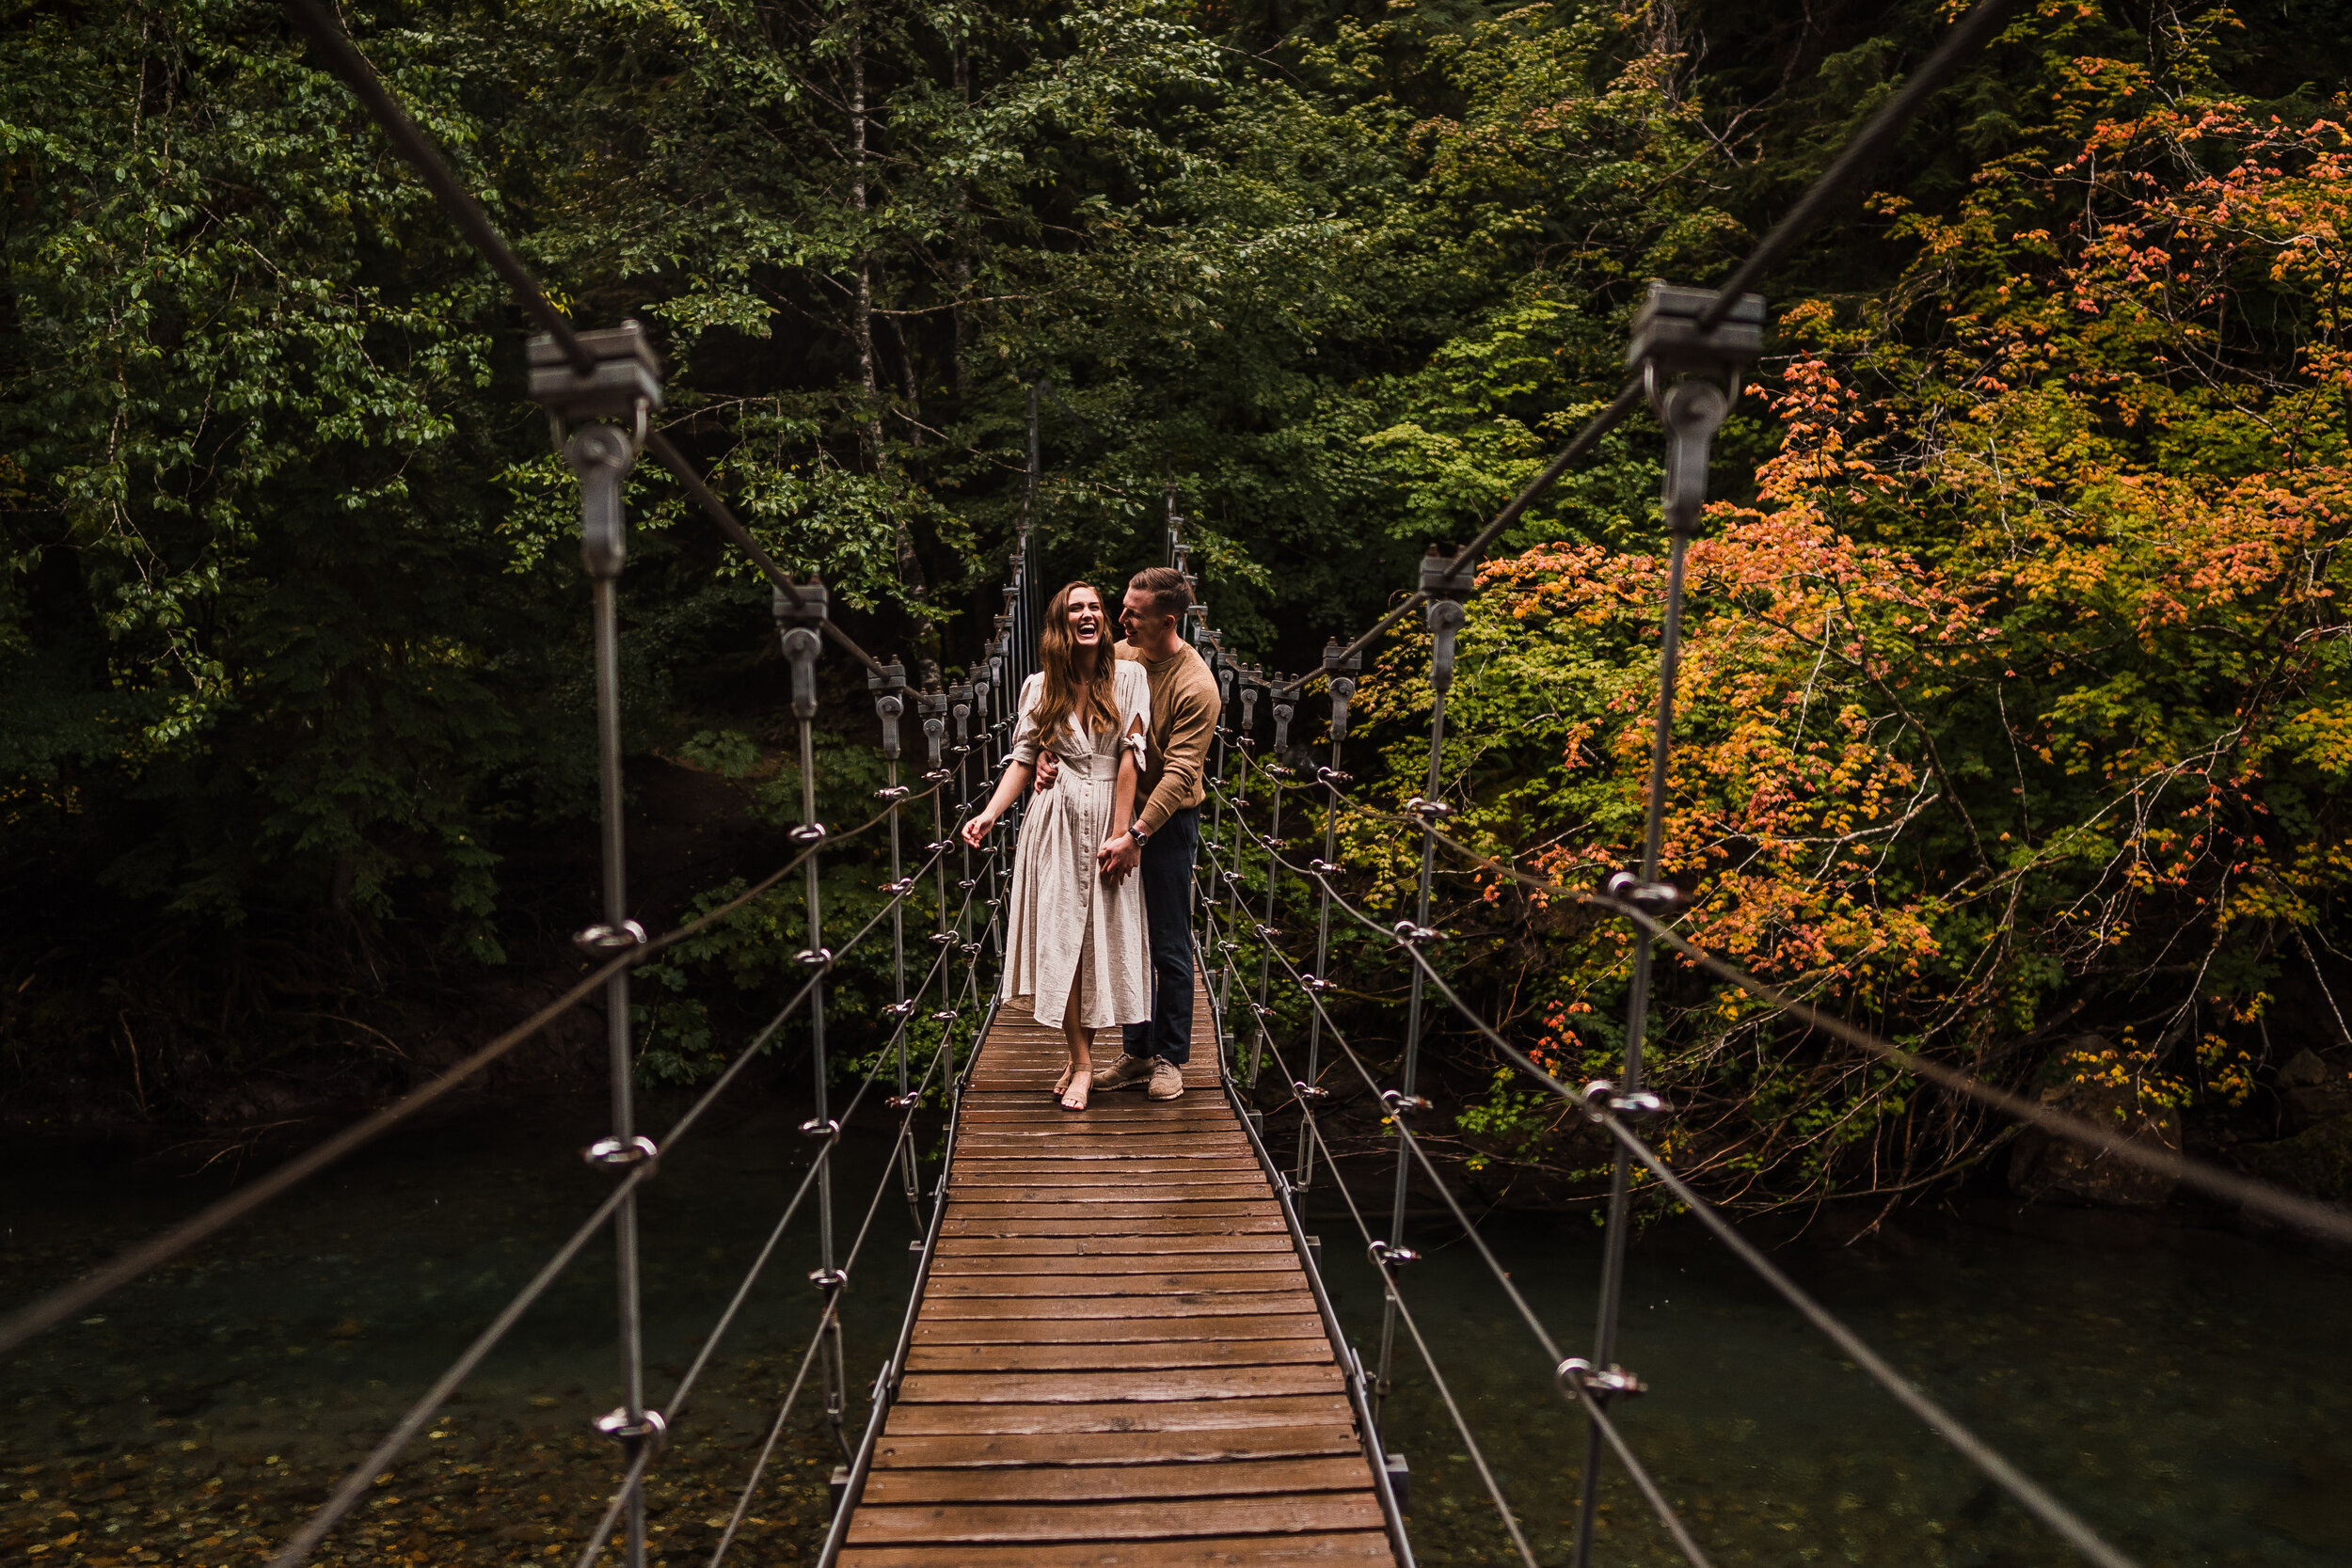 Mount Rainier Fall Engagement Session | Between the Pine Adventure Elopement Photography